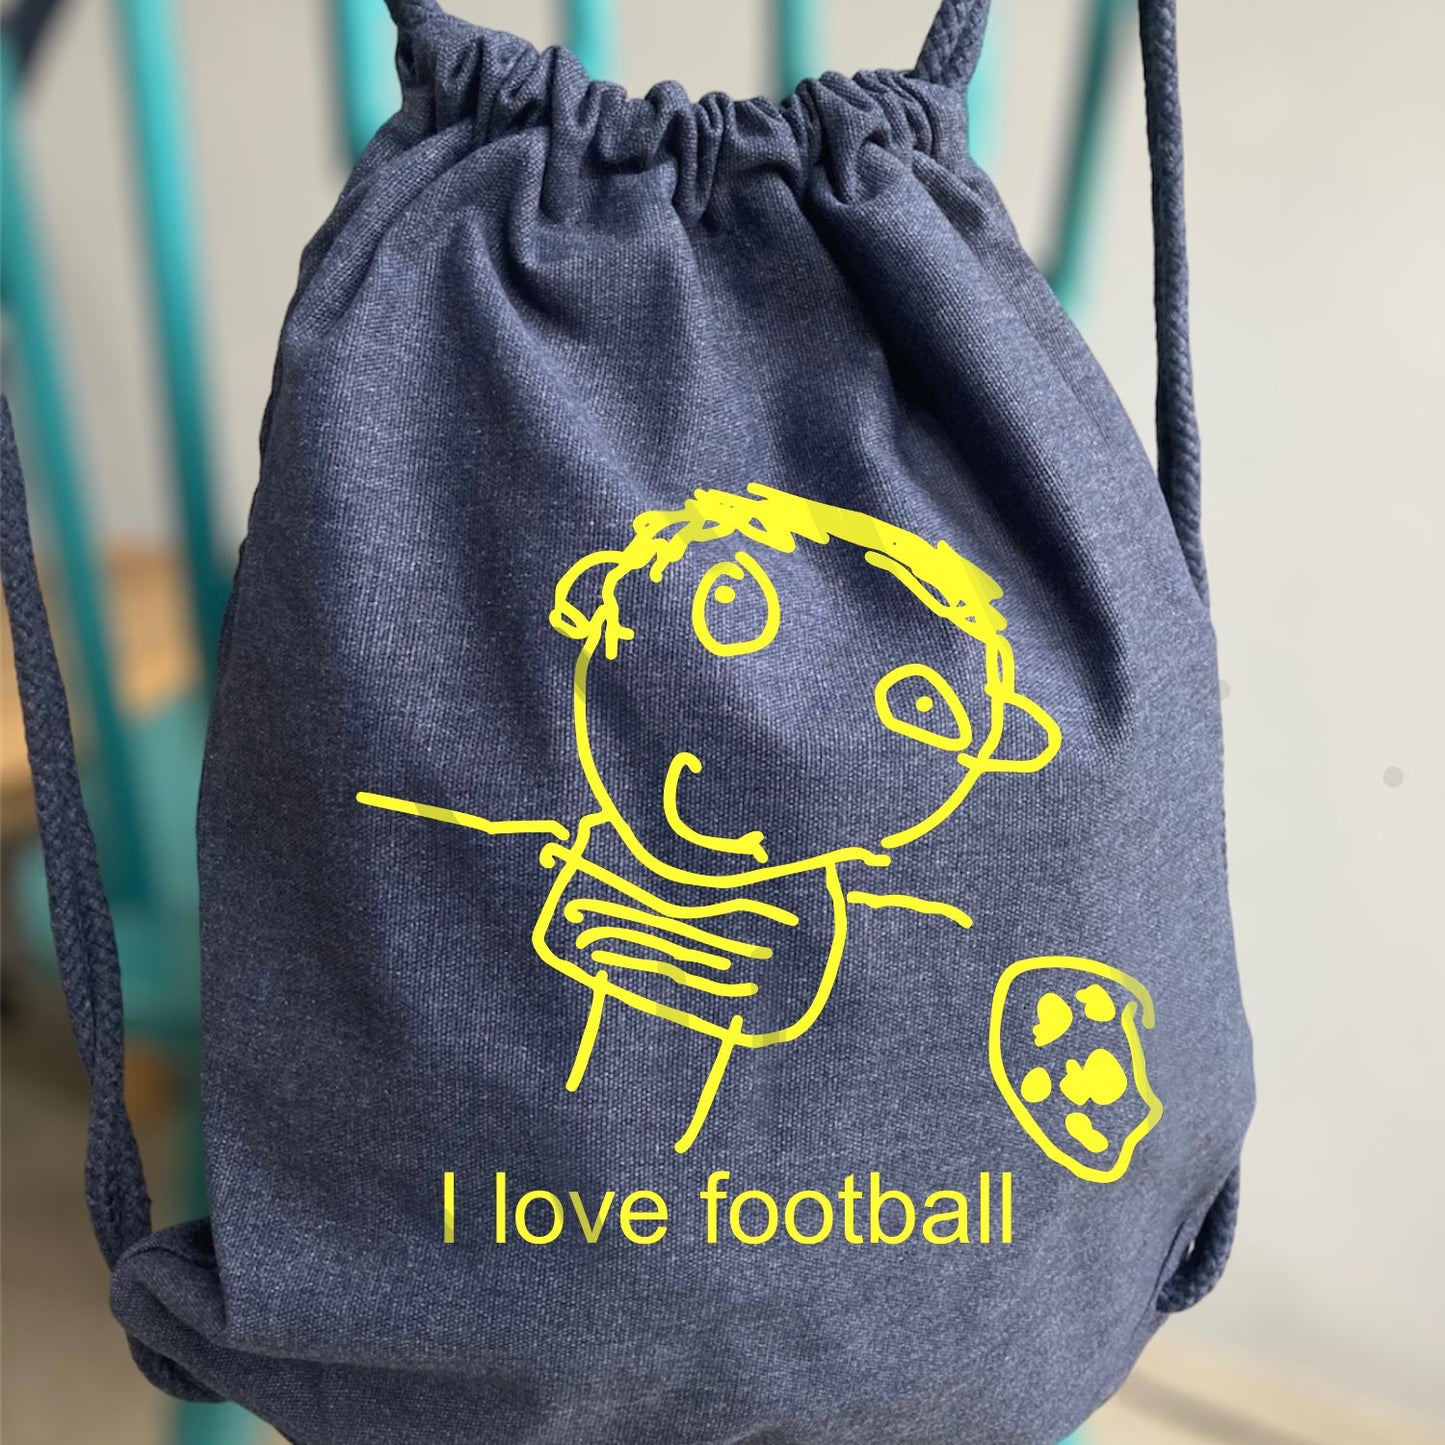 Personalised gym bag, PE bag with child's drawing